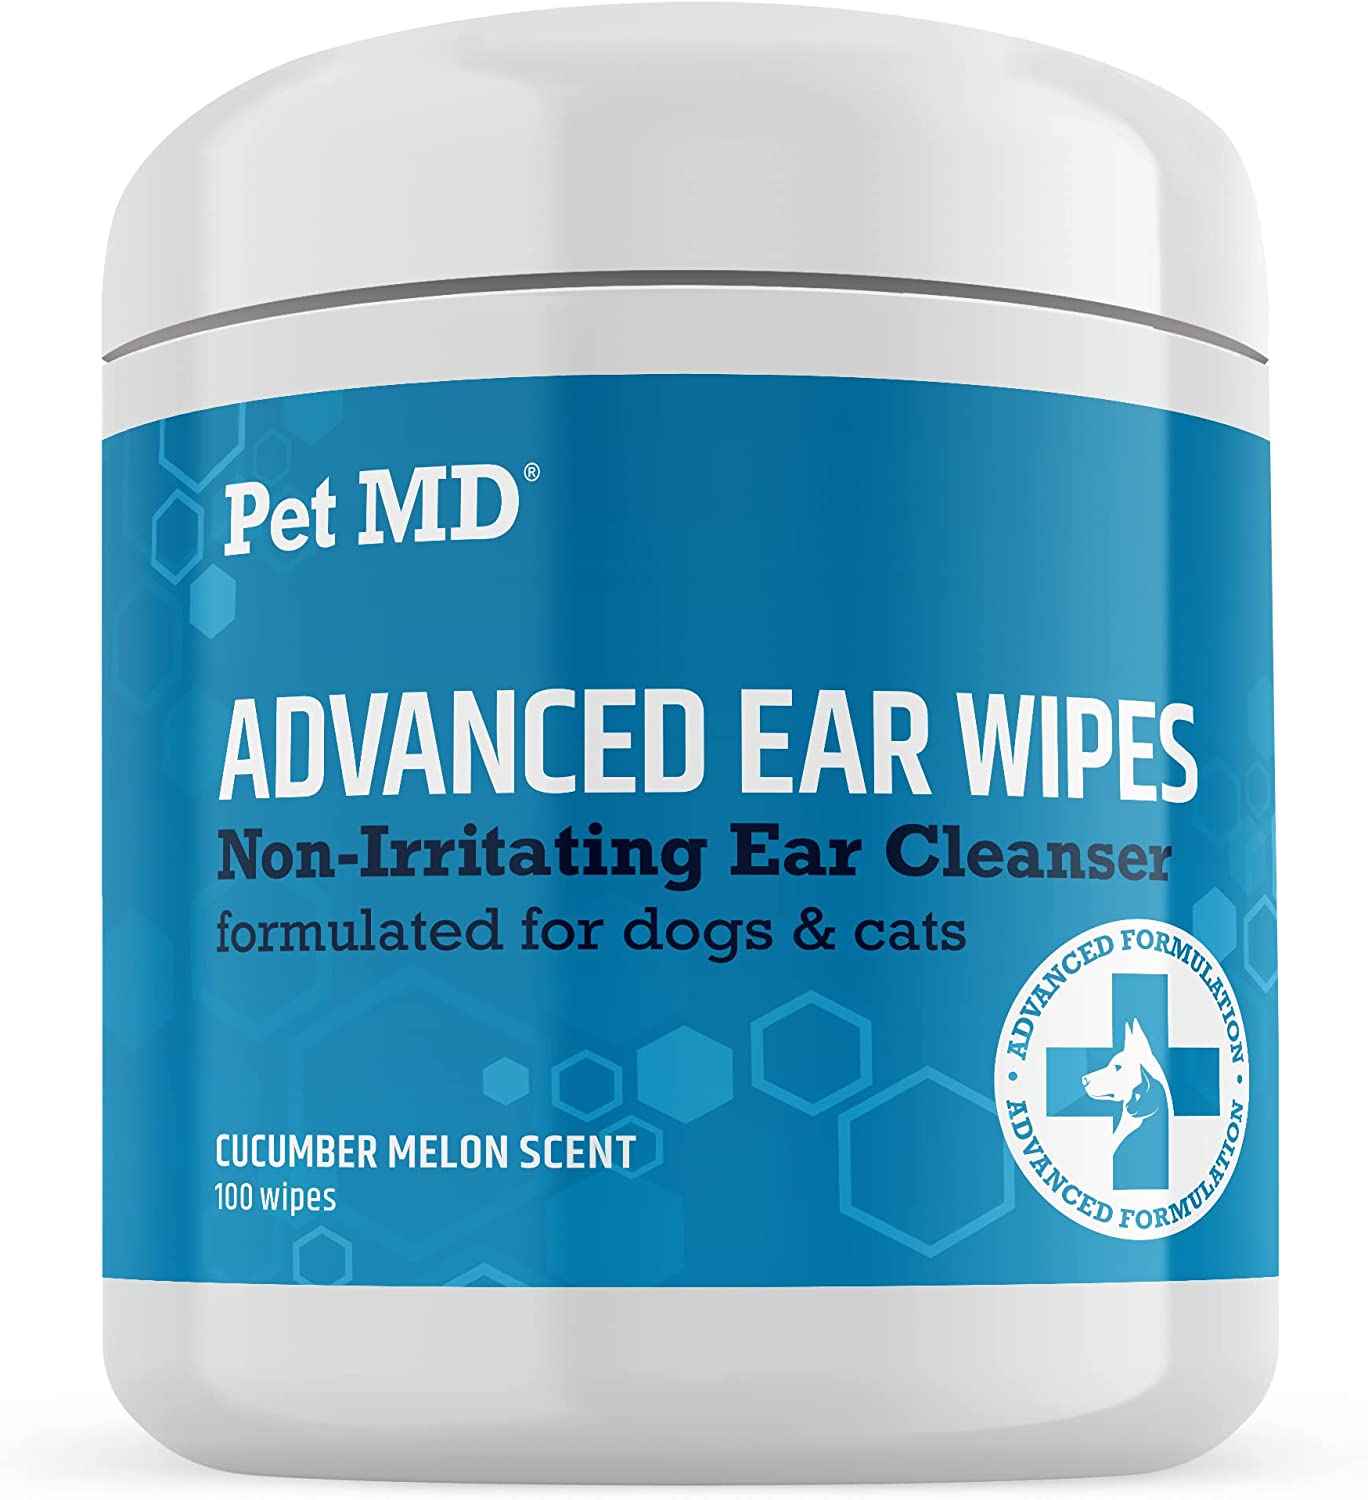 Pet MD Cat and Dog Ear Cleaner Wipes - Advanced Otic Veterinary Ear Cleaner Formula - Dog Ear Infection Treatment Helps Alleviate Ear Infections - 100 Alcohol Free Ear Wipes with Soothing Aloe Vera